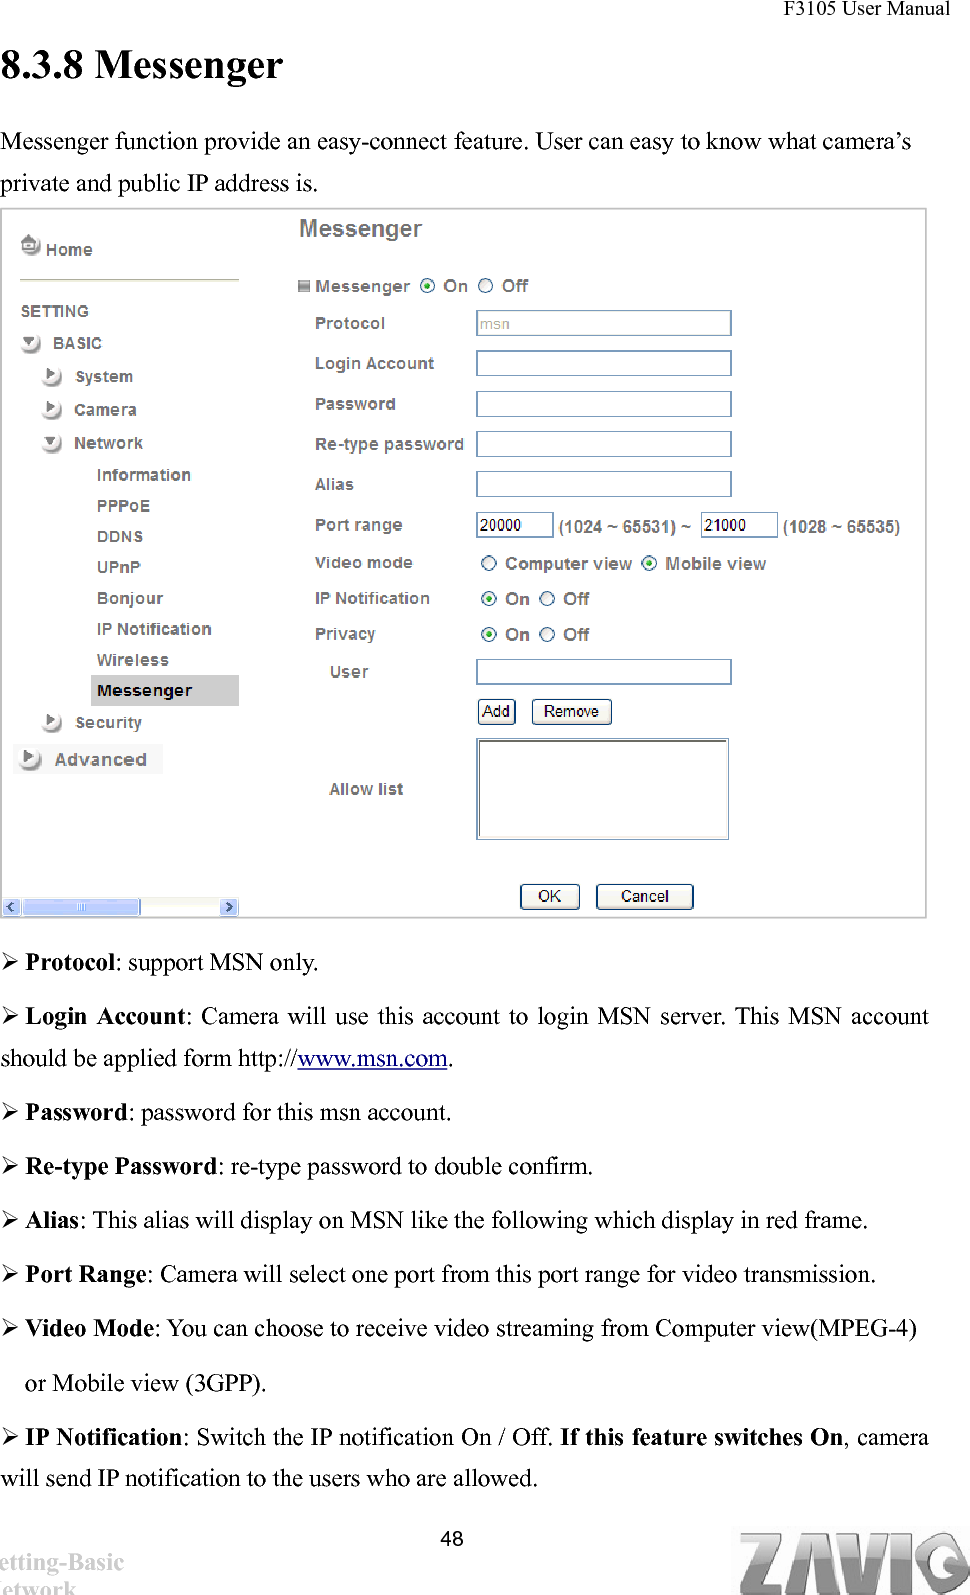 F3105 User Manual   8.3.8 Messenger Messenger function provide an easy-connect feature. User can easy to know what camera’s private and public IP address is.                   Protocol: support MSN only.  Login Account: Camera will use this account to login MSN server. This MSN account should be applied form http://www.msn.com.   Password: password for this msn account.  Re-type Password: re-type password to double confirm.  Alias: This alias will display on MSN like the following which display in red frame.  Port Range: Camera will select one port from this port range for video transmission.  Video Mode: You can choose to receive video streaming from Computer view(MPEG-4) or Mobile view (3GPP).  IP Notification: Switch the IP notification On / Off. If this feature switches On, camera will send IP notification to the users who are allowed.    48Setting-Basic Network 